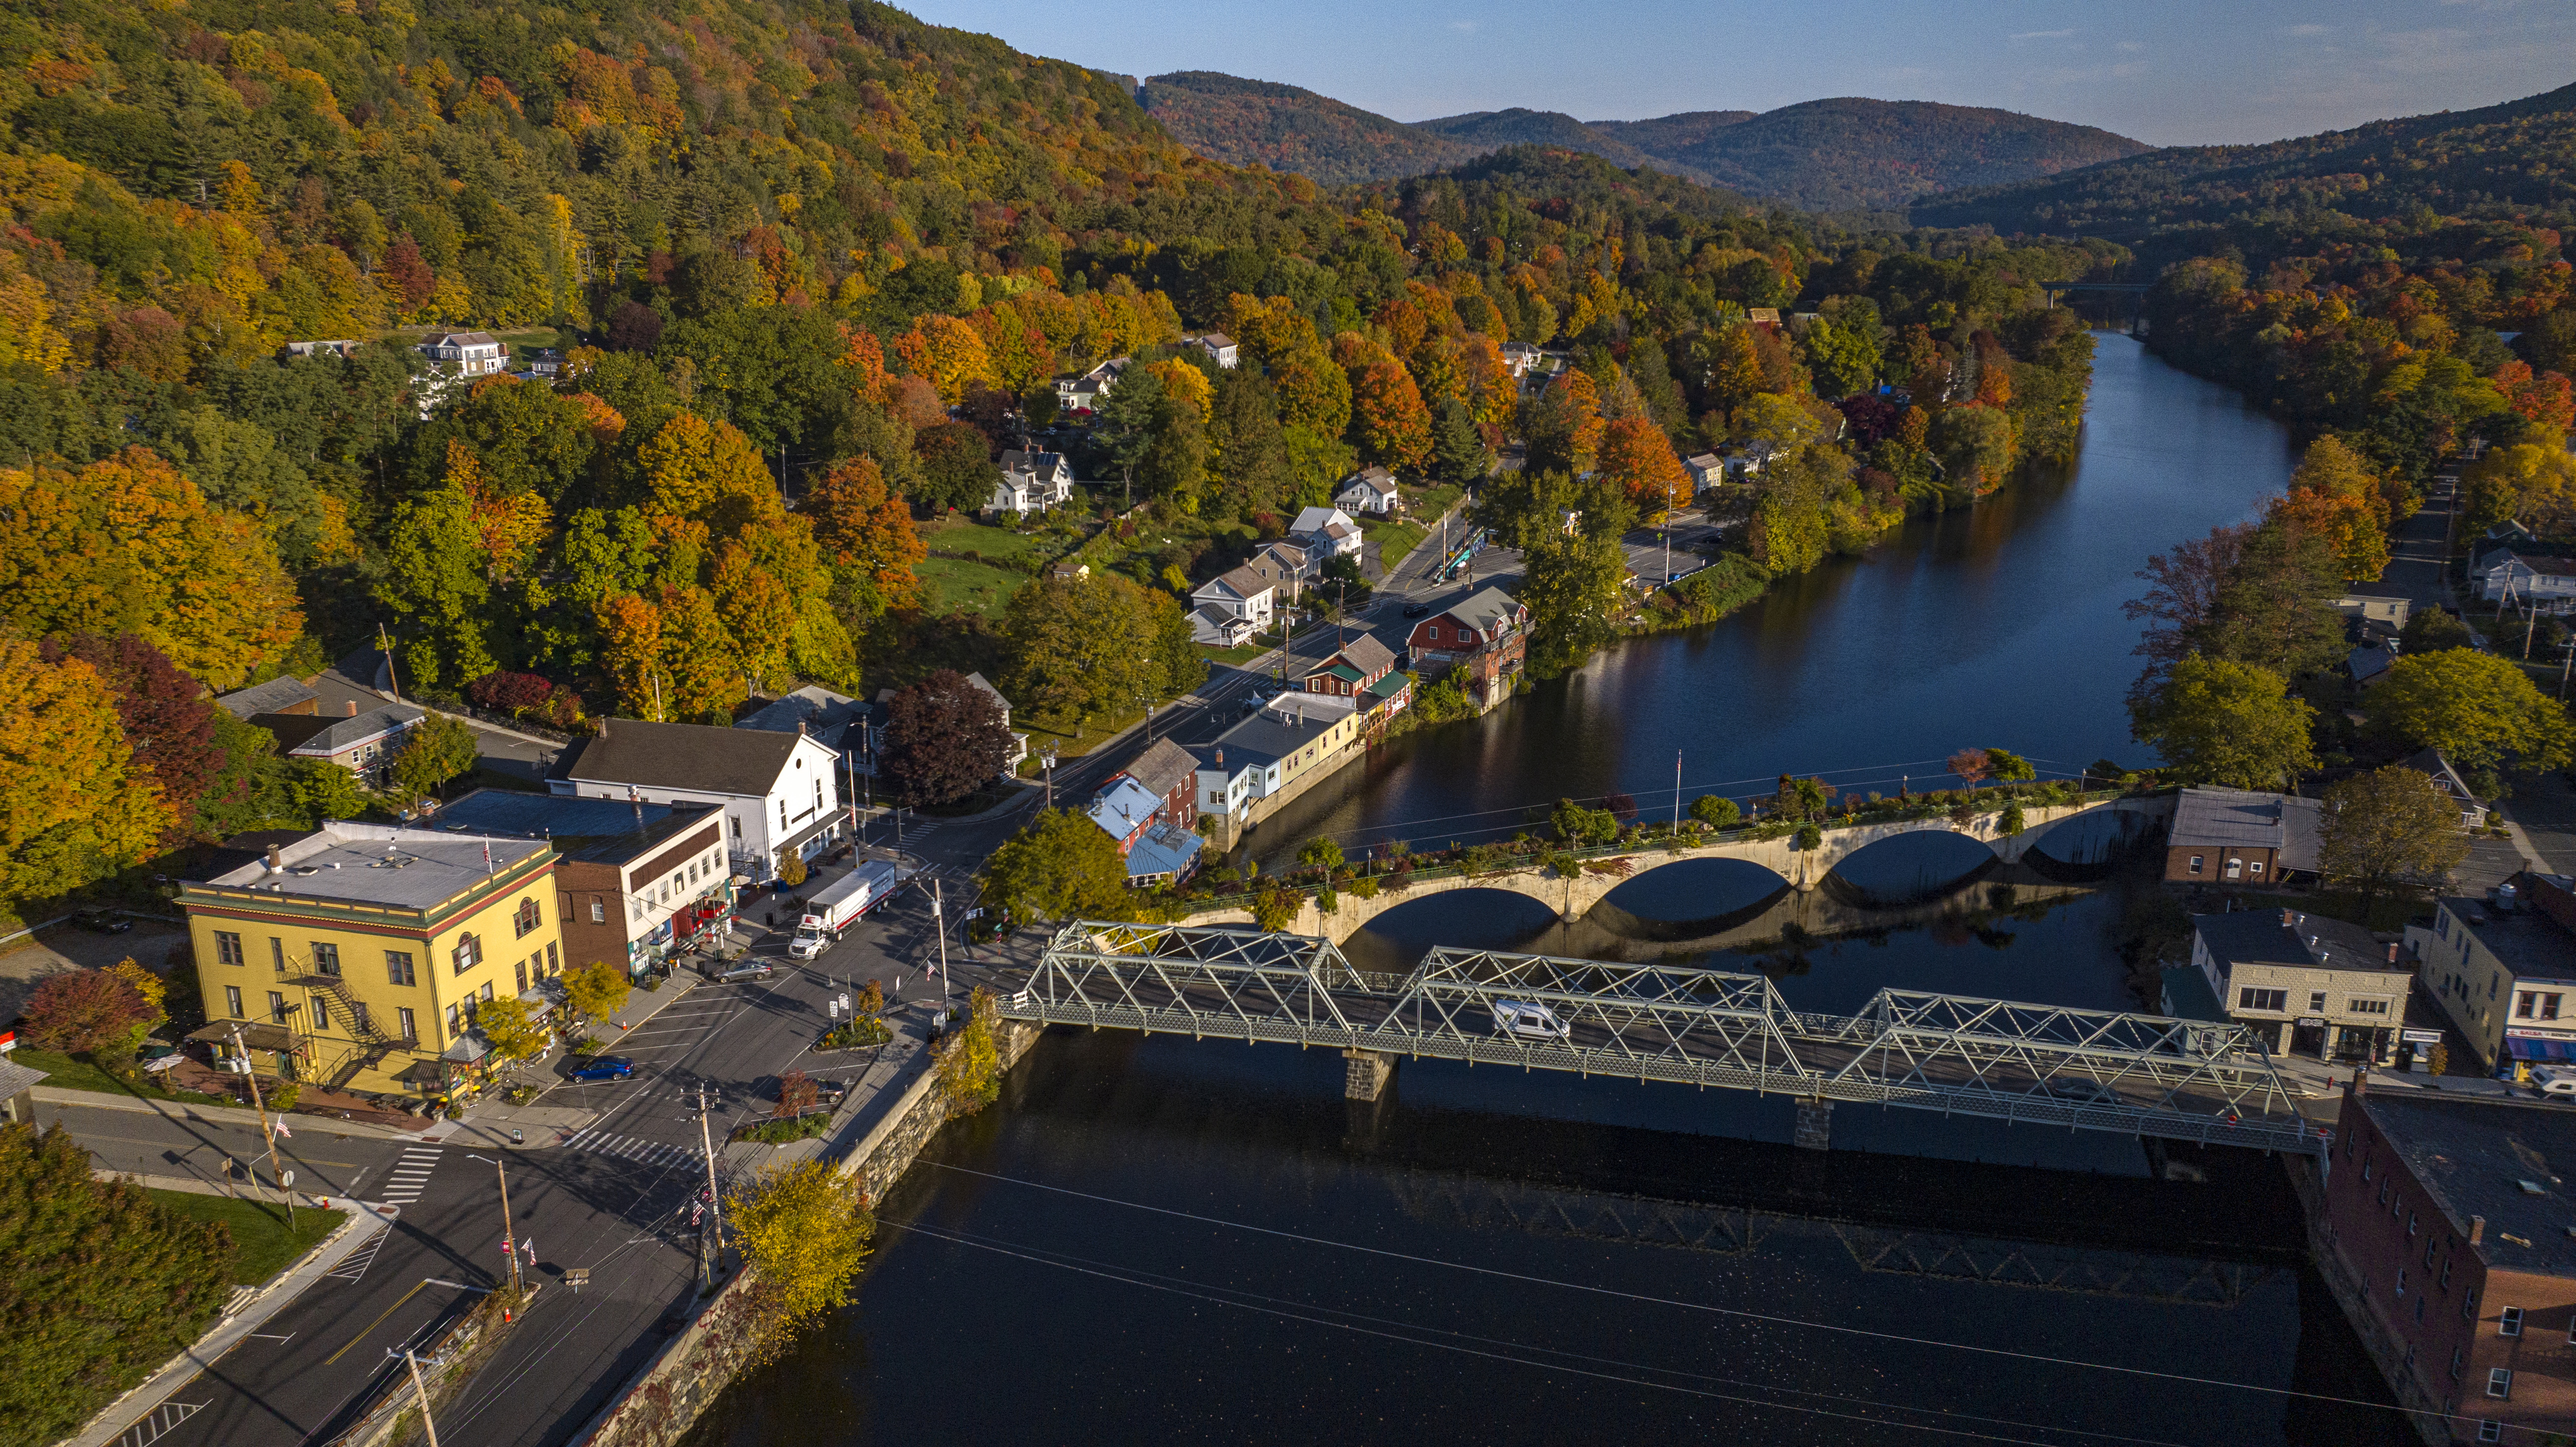 Aerial view at sunrise of Sheffield Falls in autumn, Ma. with Housatonic River running through town, Berkshire Mountains